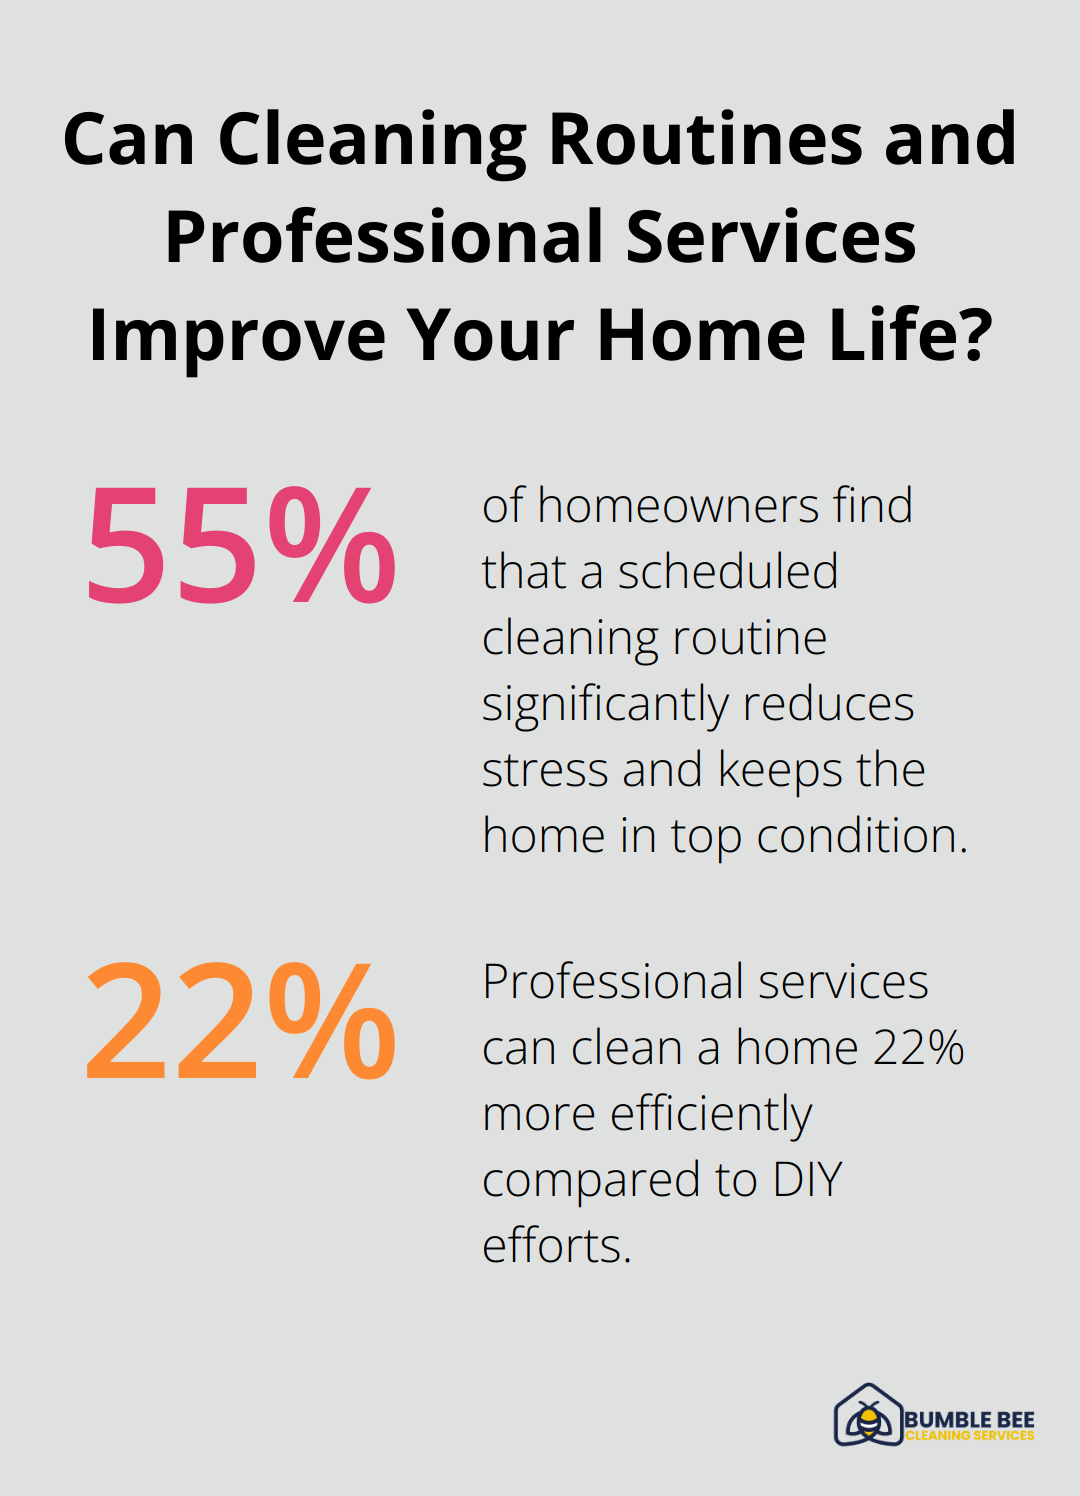 Fact - Can Cleaning Routines and Professional Services Improve Your Home Life?